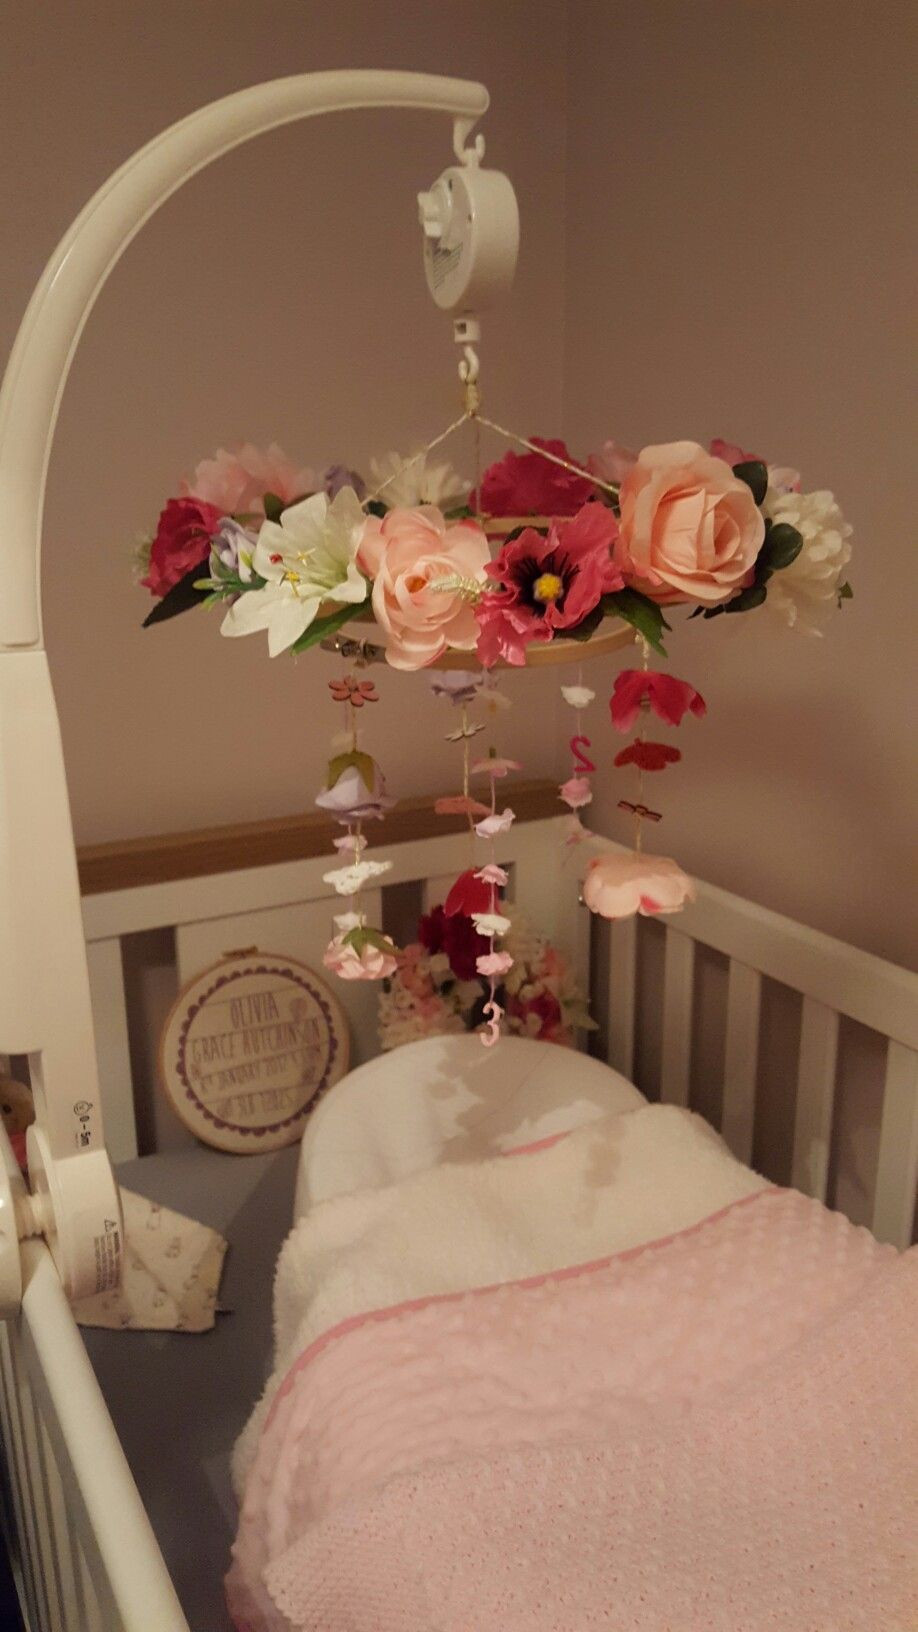 D.I.Y Baby Girl Room Decorations
 DIY Woodland Nursery Mobile for baby girls room babies